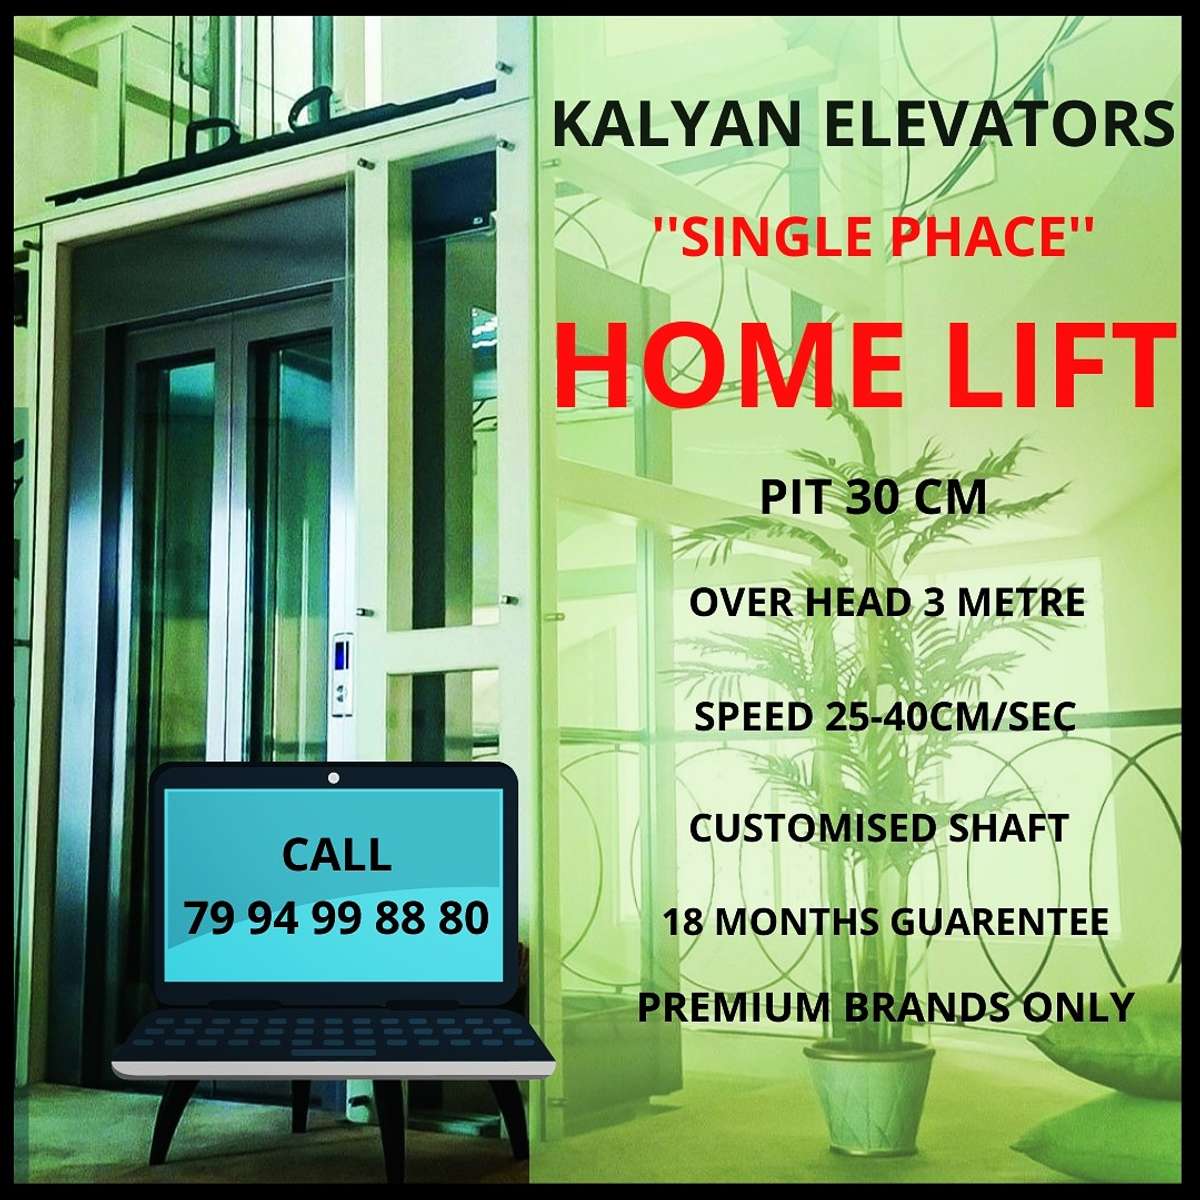 Kalyan Home Elevators offers the long-awaited solution to vertical mobility within homes at affordable prices and easy-to-use features. Our customized and aesthetically designed home lifts are easily installable in preexisting homes as well as houses under construction, and help you relieve the headache of climbing. More details:- call....

we do all kind of :-
Home Lifts
Hospital Lifts
Capsule Lifts
Commercial Lifts
Customised Passenger Lifts
Car Lifts
Parking Lifts